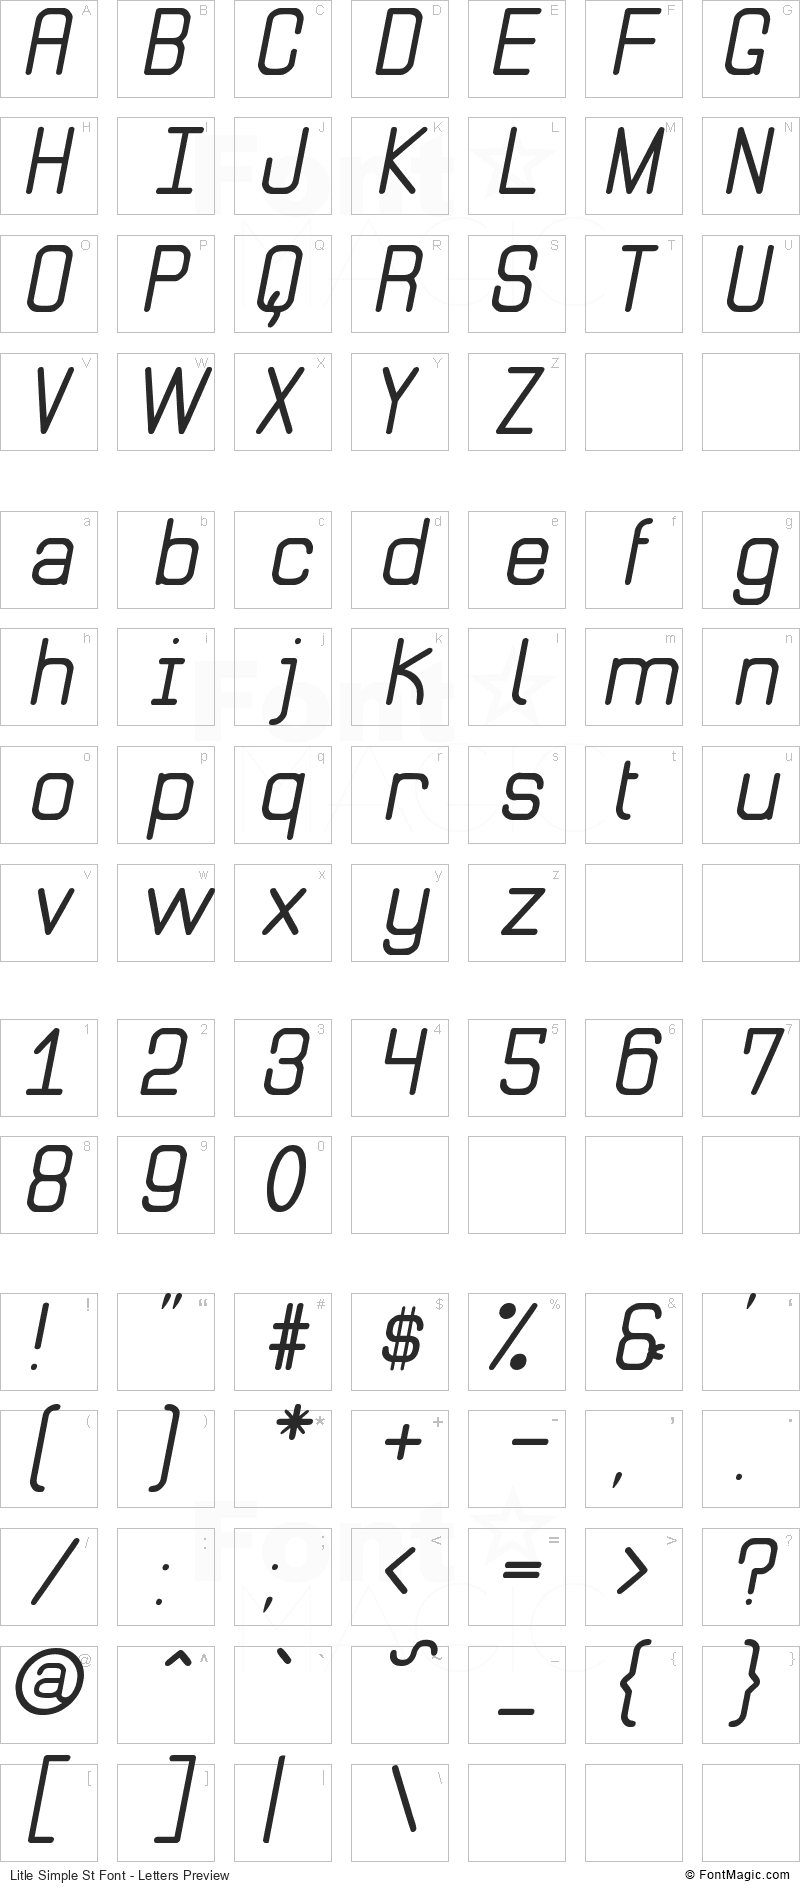 Litle Simple St Font - All Latters Preview Chart